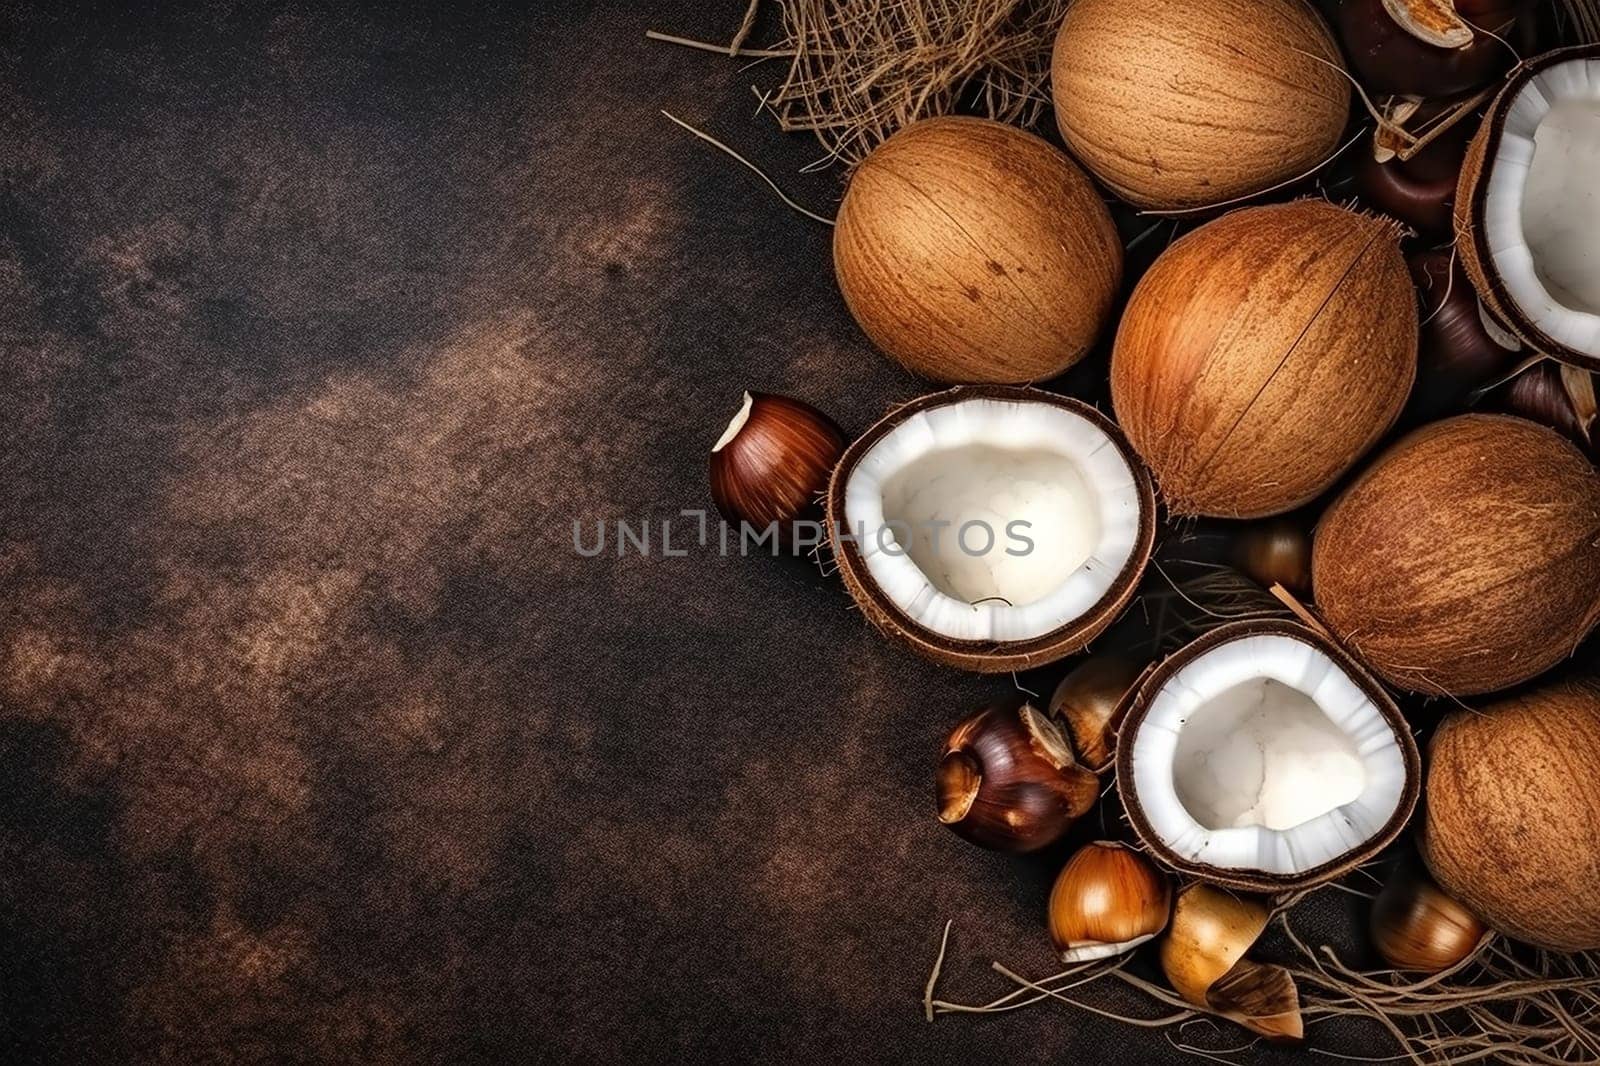 Assortment of whole and halved nuts with hard shells on a textured background.